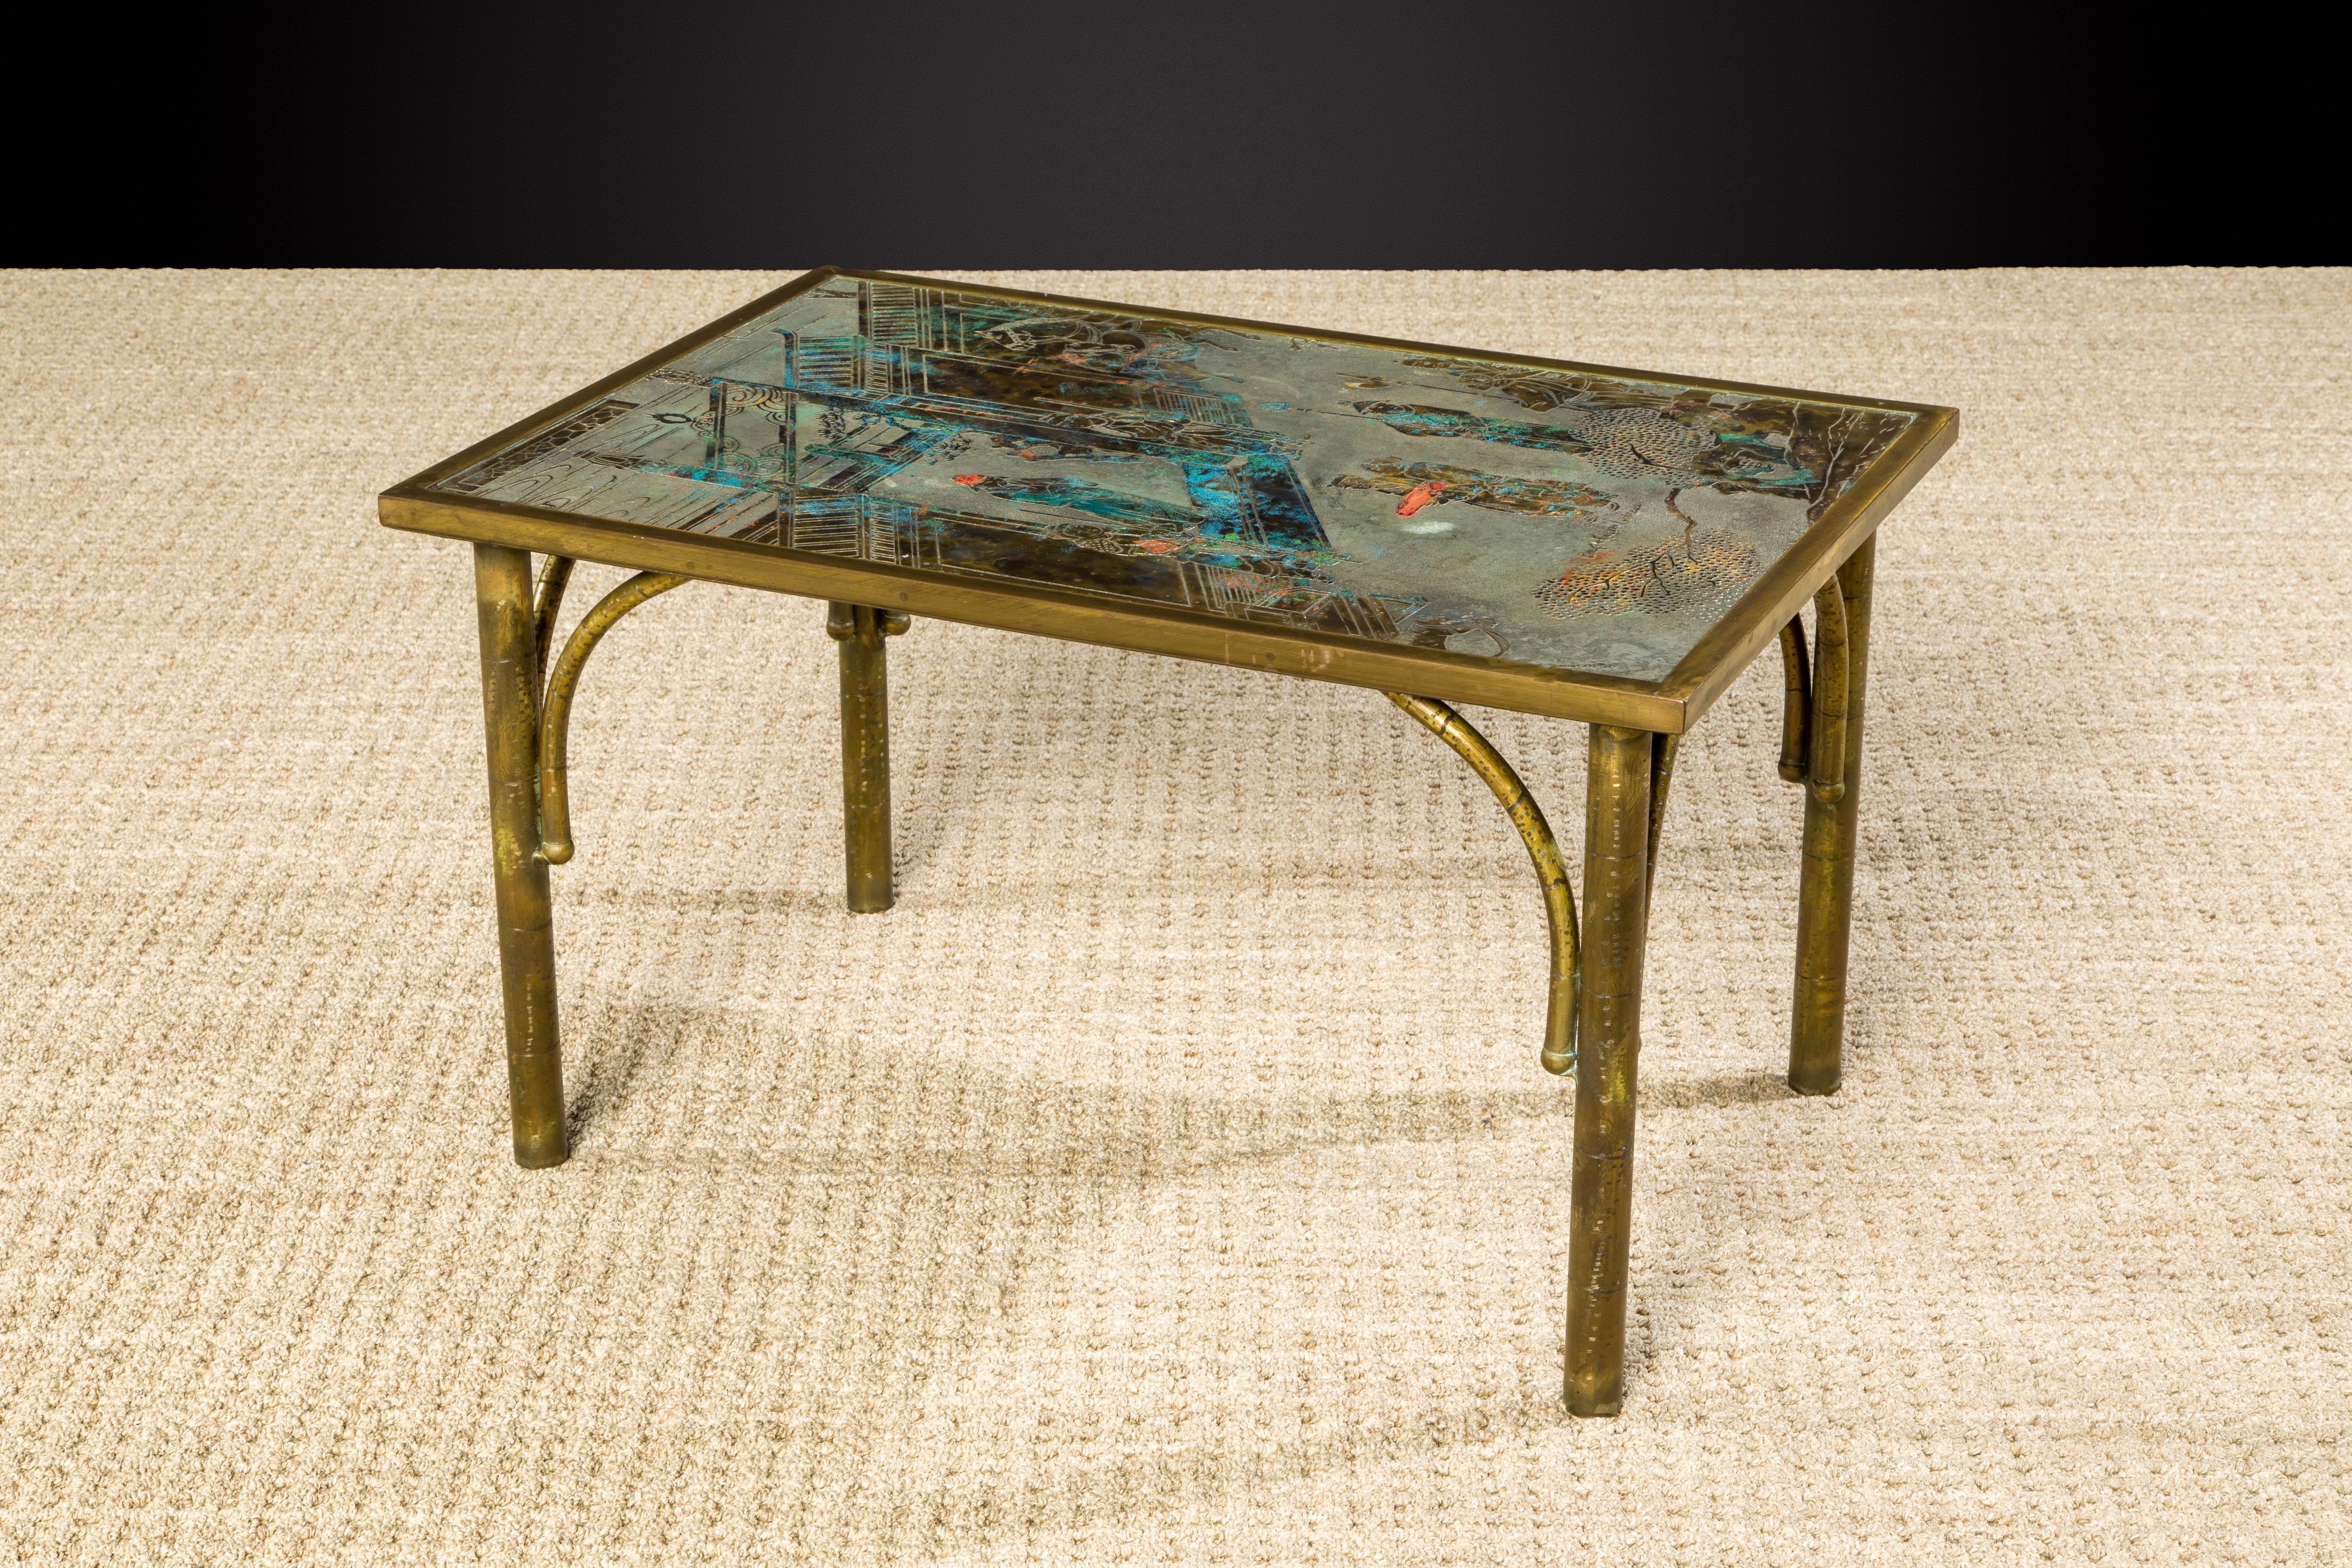 This is a rare iteration of the classic and highly sought after 'Chan' coffee table by father and son team, Philip and Kelvin LaVerne (New York), produced in the 1960s and signed with the artists names on the top (see photos). Ingeniously designed